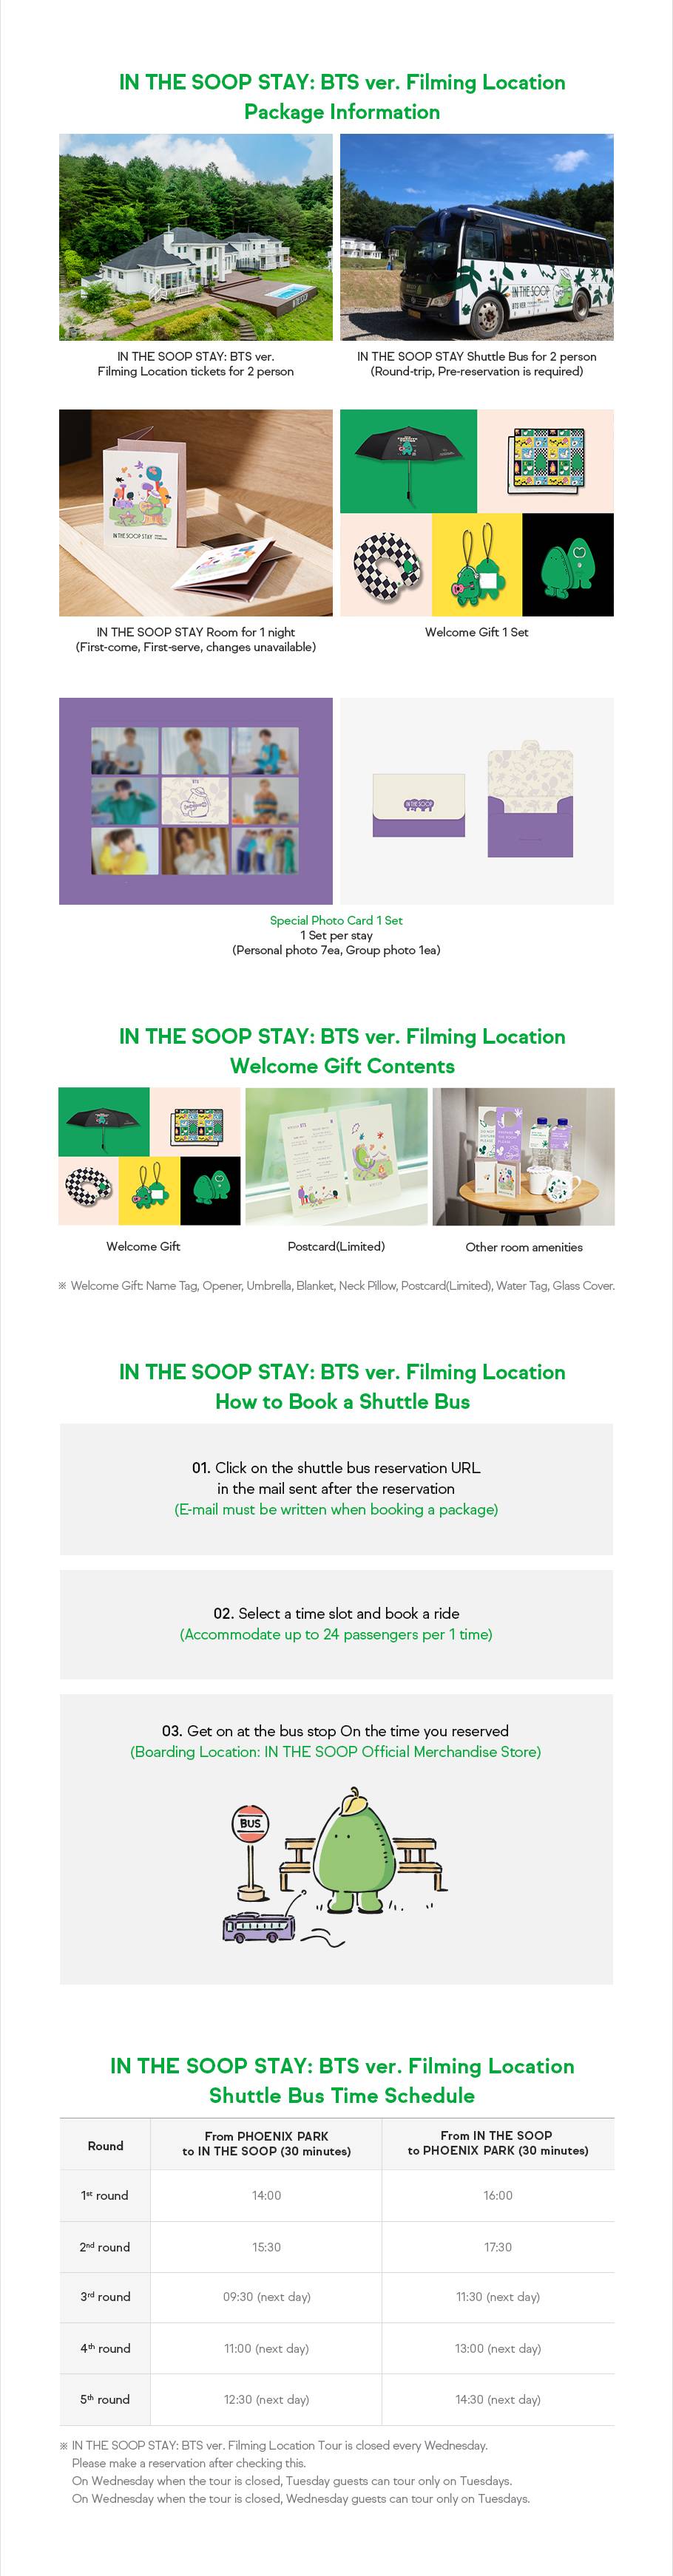 IN THE SOOP STAY: BTS ver. Filming Location Package Information. IN THE SOOP STAY: BTS ver. Filming Location tickets for 2 person + IN THE SOOP STAY Shuttle Bus for 2 person(Round-trip, Pre-reservation is required) + IN THE SOOP STAY Room for 1 night(First-come, First-serve, changes unavailable) + Welcome Gift 1 Set + Special Photo Card 1 Set, 1 Set per stay.(Personal photo 7ea, Group photo 1ea) IN THE SOOP STAY: BTS ver. Filming Location Welcome Gift Contents: Welcome Gift + Postcard(Limited)+ Other room amenities(Welcome Gift: Name Tag, Opener, Umbrella, Blanket, Neck Pillow, Postcard(Limited), Water Tag, Glass Cover) IN THE SOOP STAY: BTS ver. Filming Location How to Book a Shuttle Bus. 01. Click on the shuttle bus reservation URL in the mail sent after the reservation(E-mail must be written when booking a package) 02. Select a time slot and book a ride(Accommodate up to 24 passengers per 1 time) 03. Get on at the bus stop On the time you reserved(Boarding Location: IN THE SOOP Official Merchandise Store) IN THE SOOP STAY: BTS ver. Filming Location Shuttle Bus Time Schedule. From PHOENIX PARK to IN THE SOOP(30 minutes): 1st round 14:00, 2nd round 15:30, 3rd round 09:30(next day), 4th round 11:00(next day), 5th round 12:30(next day), From IN THE SOOP to PHOENIX PARK (30 minutes): 1st round 16:00, 2nd round 17:30, 3rd round 11:30(next day), 4th round 13:00(next day), 5th round 14:30(next day) IN THE SOOP STAY: BTS ver. Filming Location Tour is closed every Wednesday. Please make a reservation after checking this. On Wednesday when the tour is closed, Tuesday guests can tour only on Tuesdays. On Wednesday when the tour is closed, Wednesday guests can tour only on Tuesdays. 